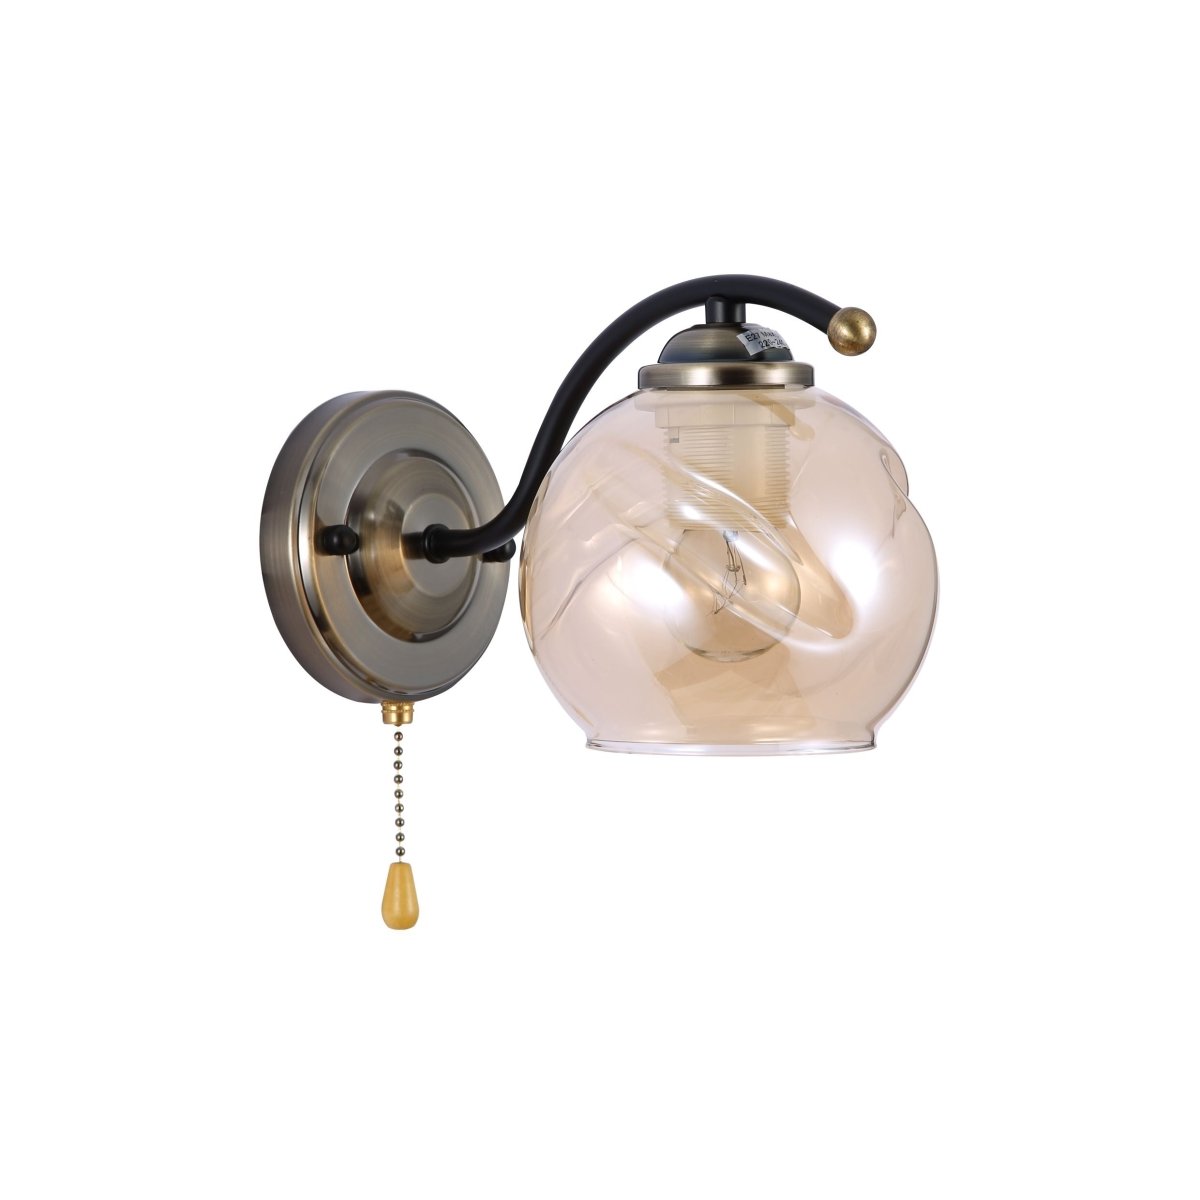 Amber Glass Black And Antique Brass Wall Light E27 And Pull Down Switch's main image.